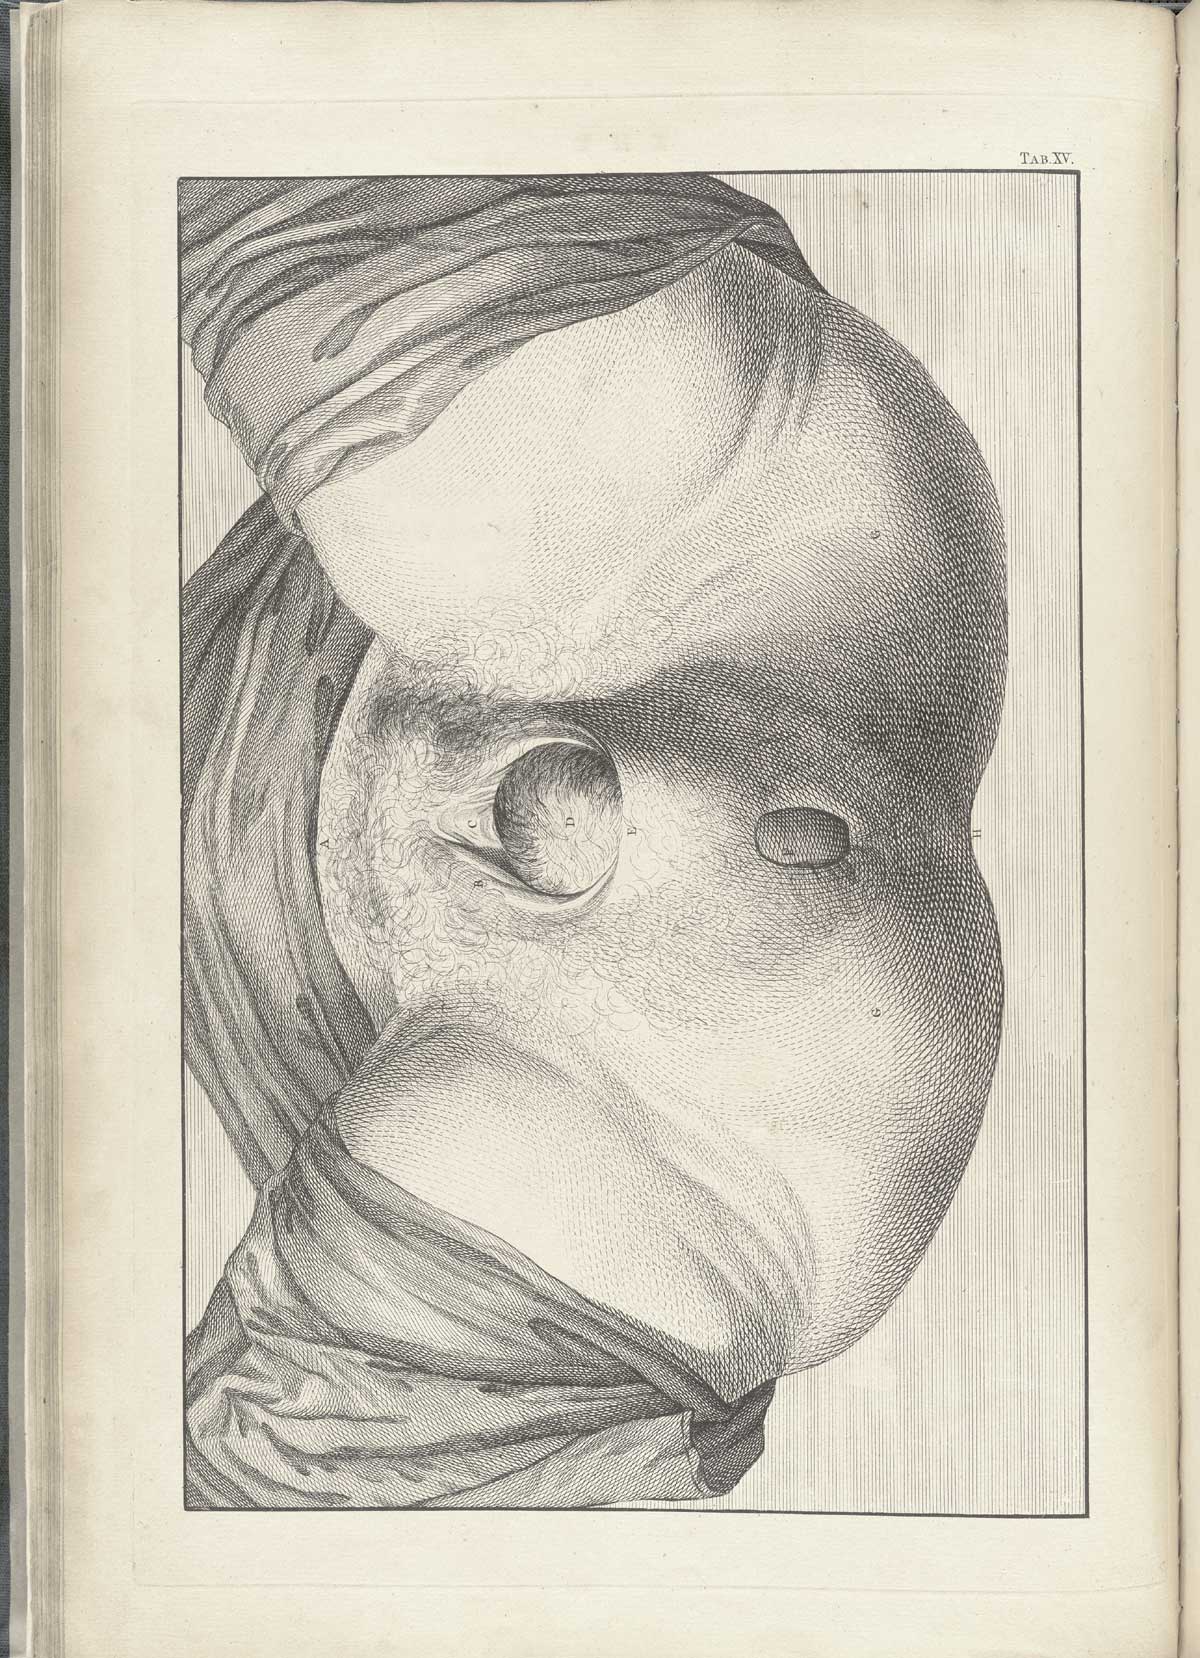 Table 15 of William Smellie's A sett of anatomical tables, with explanations, and an abridgment, of the practice of midwifery, featuring the illustrated drawing of a woman's vagina with a fetus' head crowning.